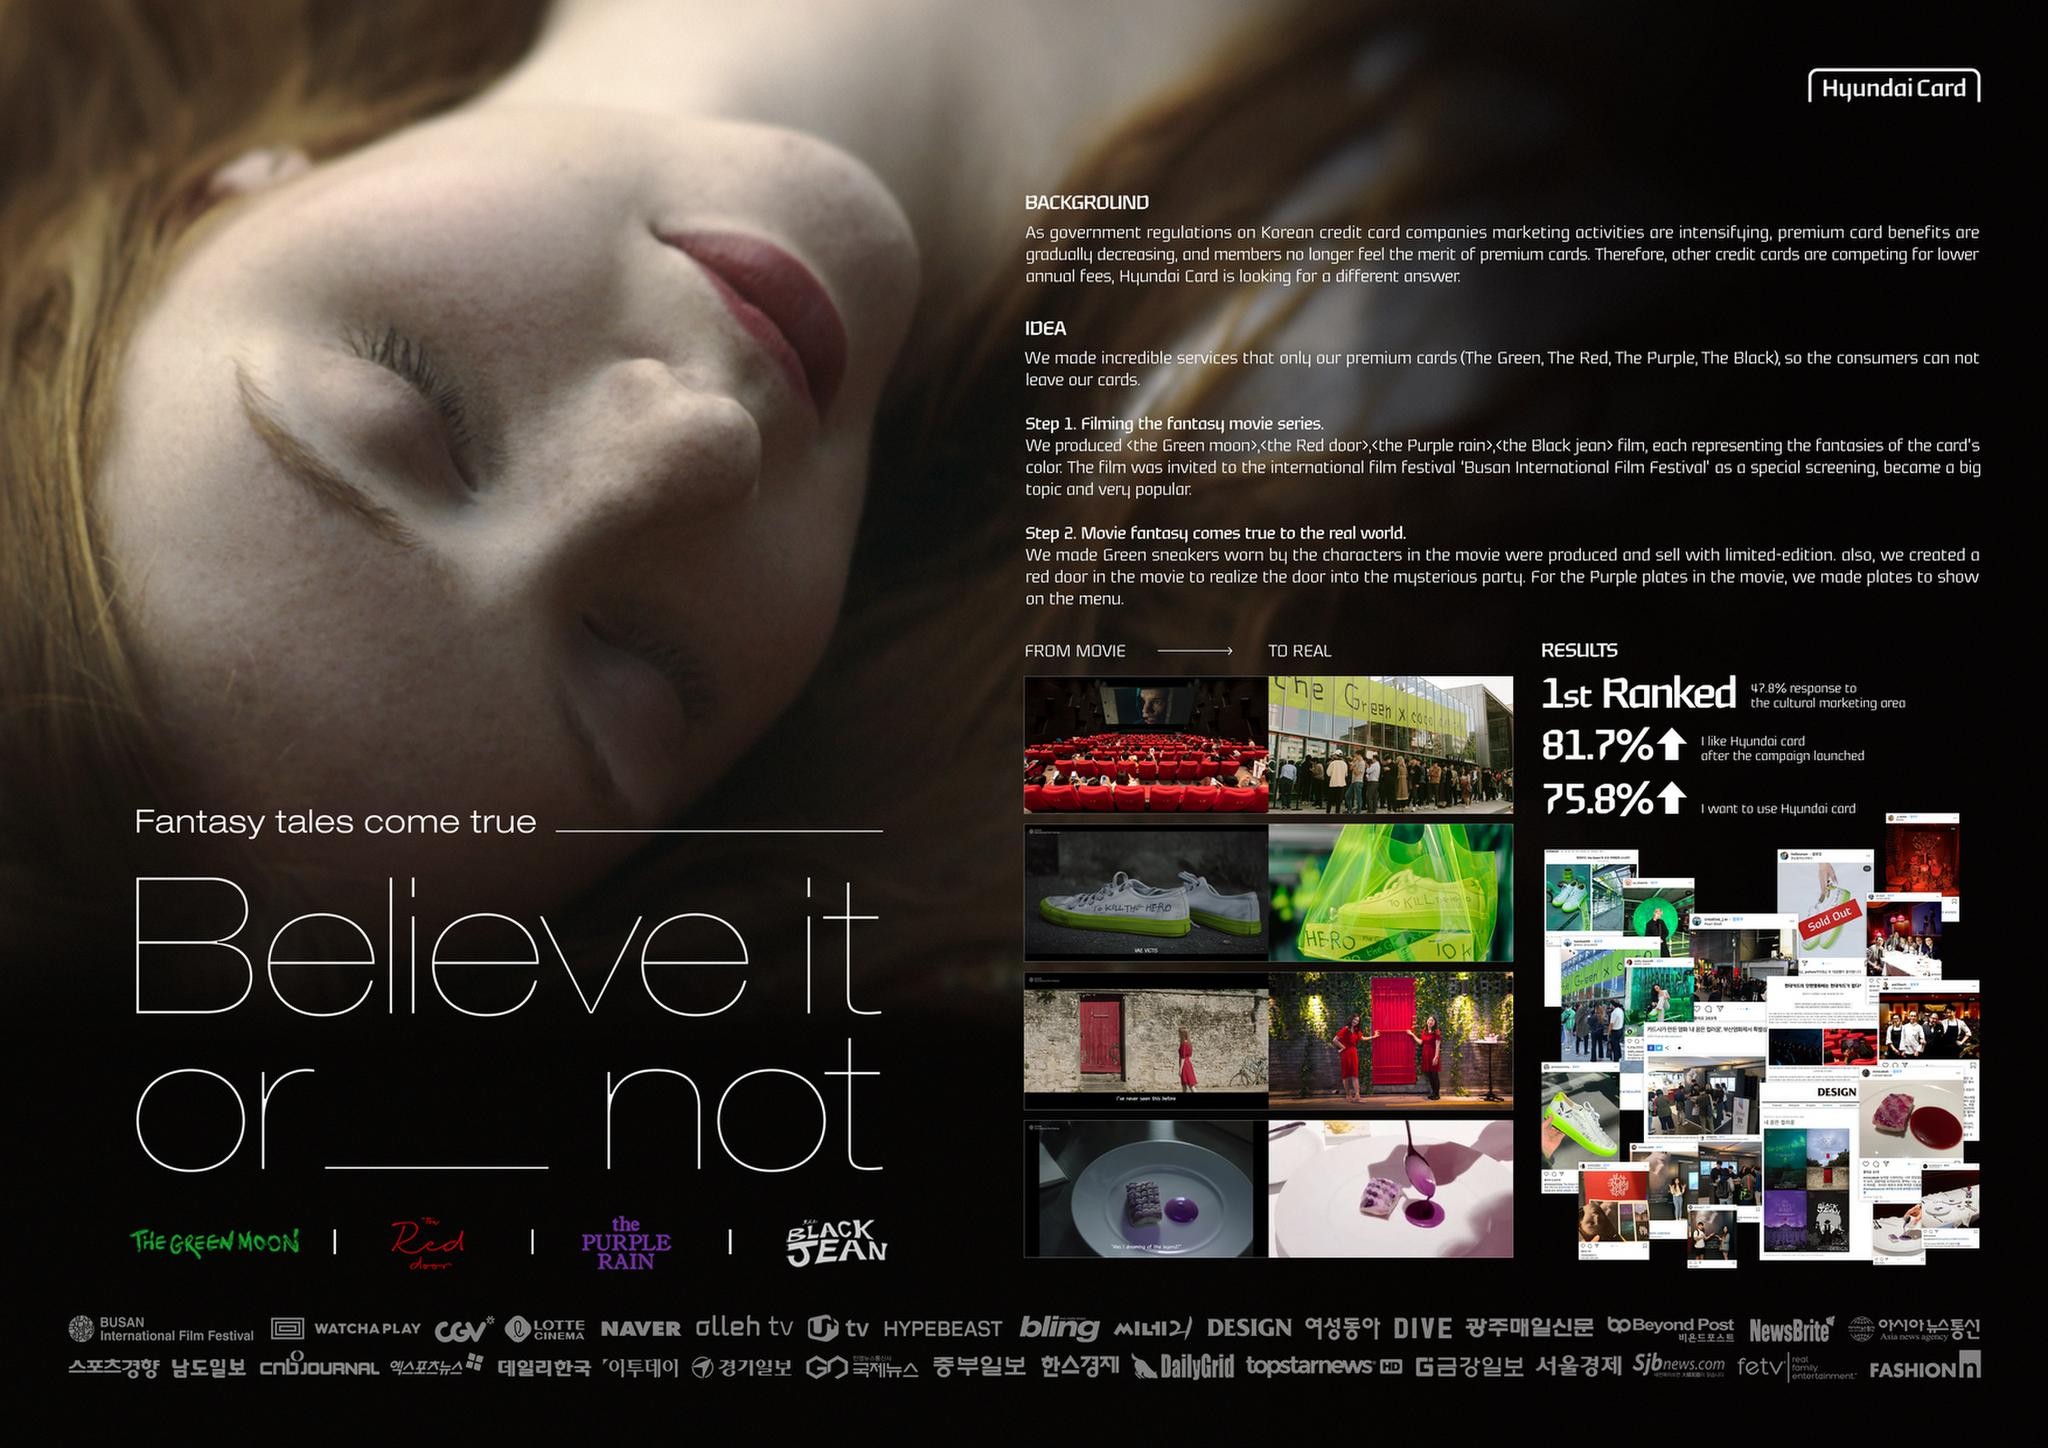 Hyundai Card "BELIEVE IT OR NOT" Campaign